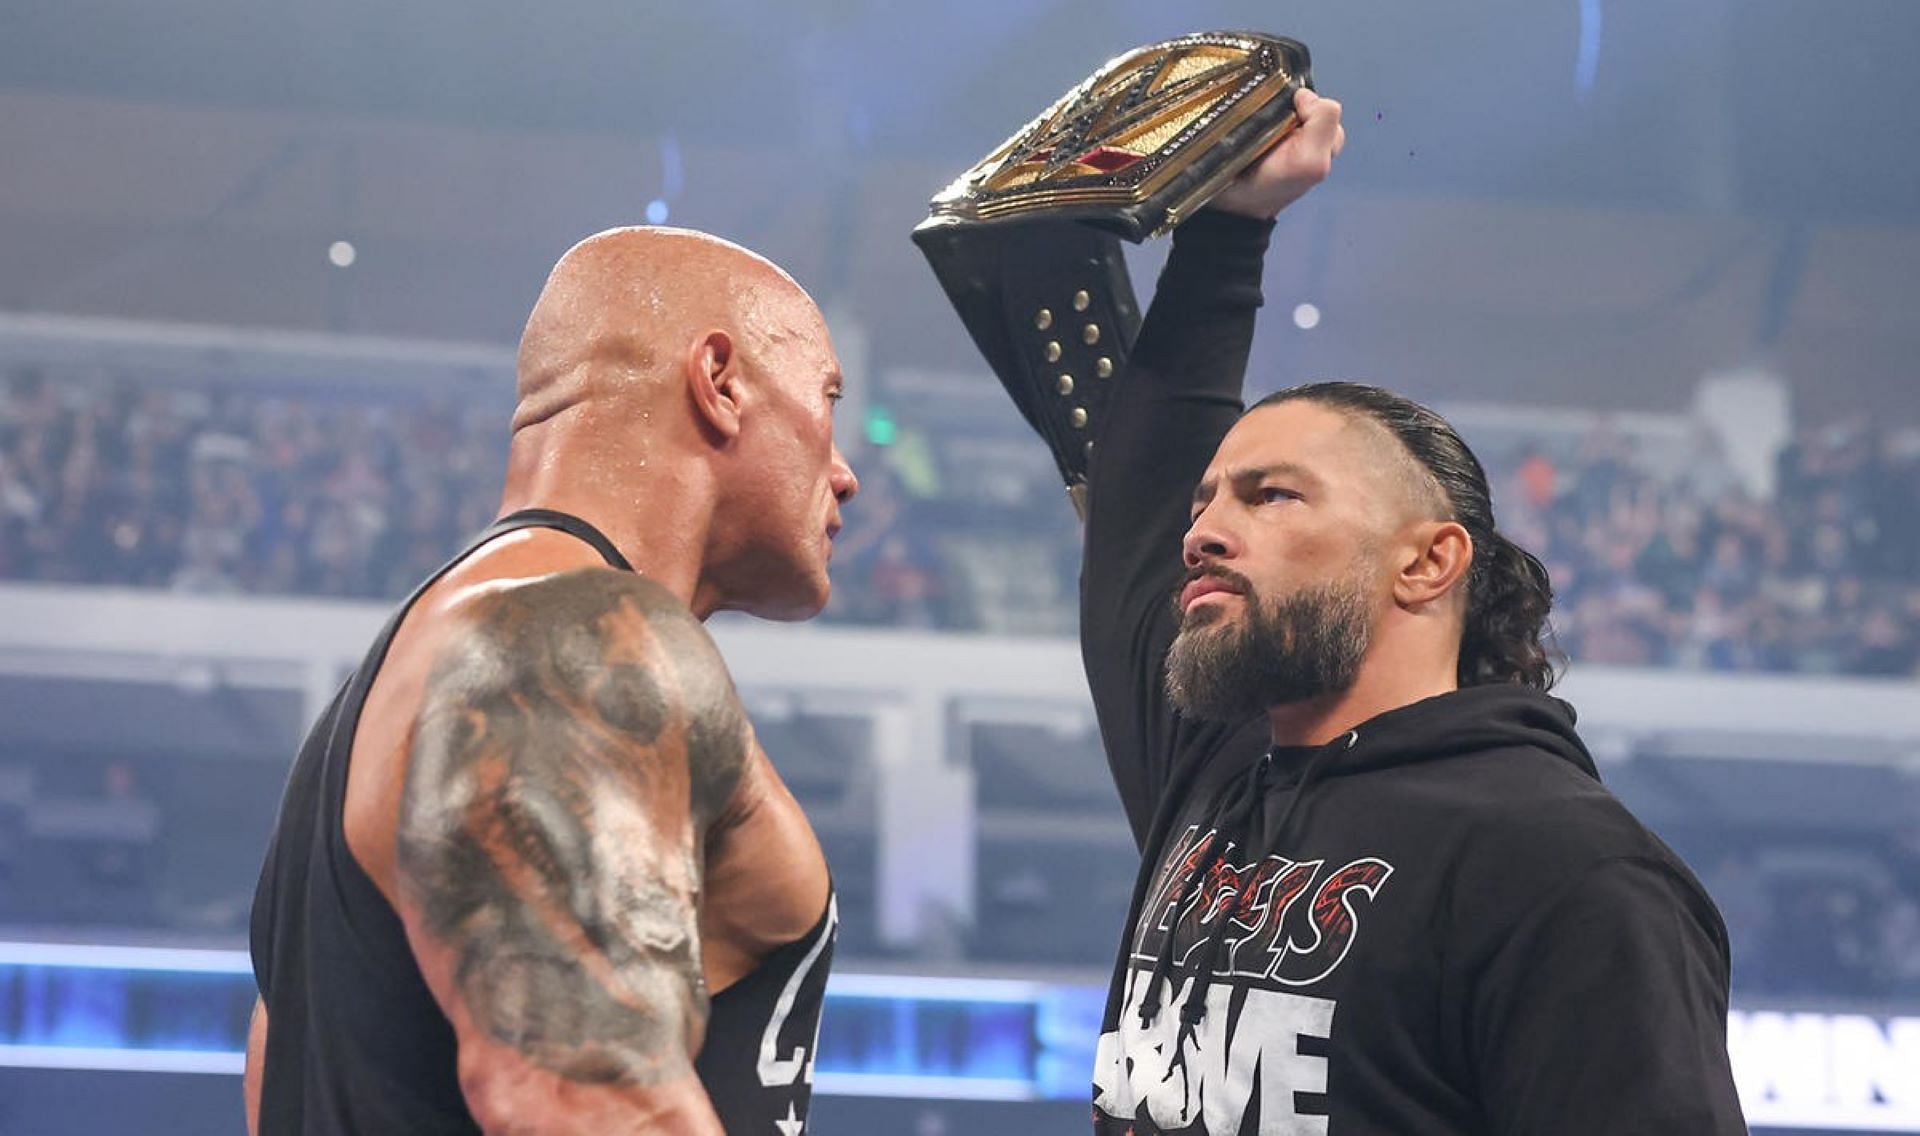 Fans who want to see The Rock and Roman Reigns fight will have to wait.